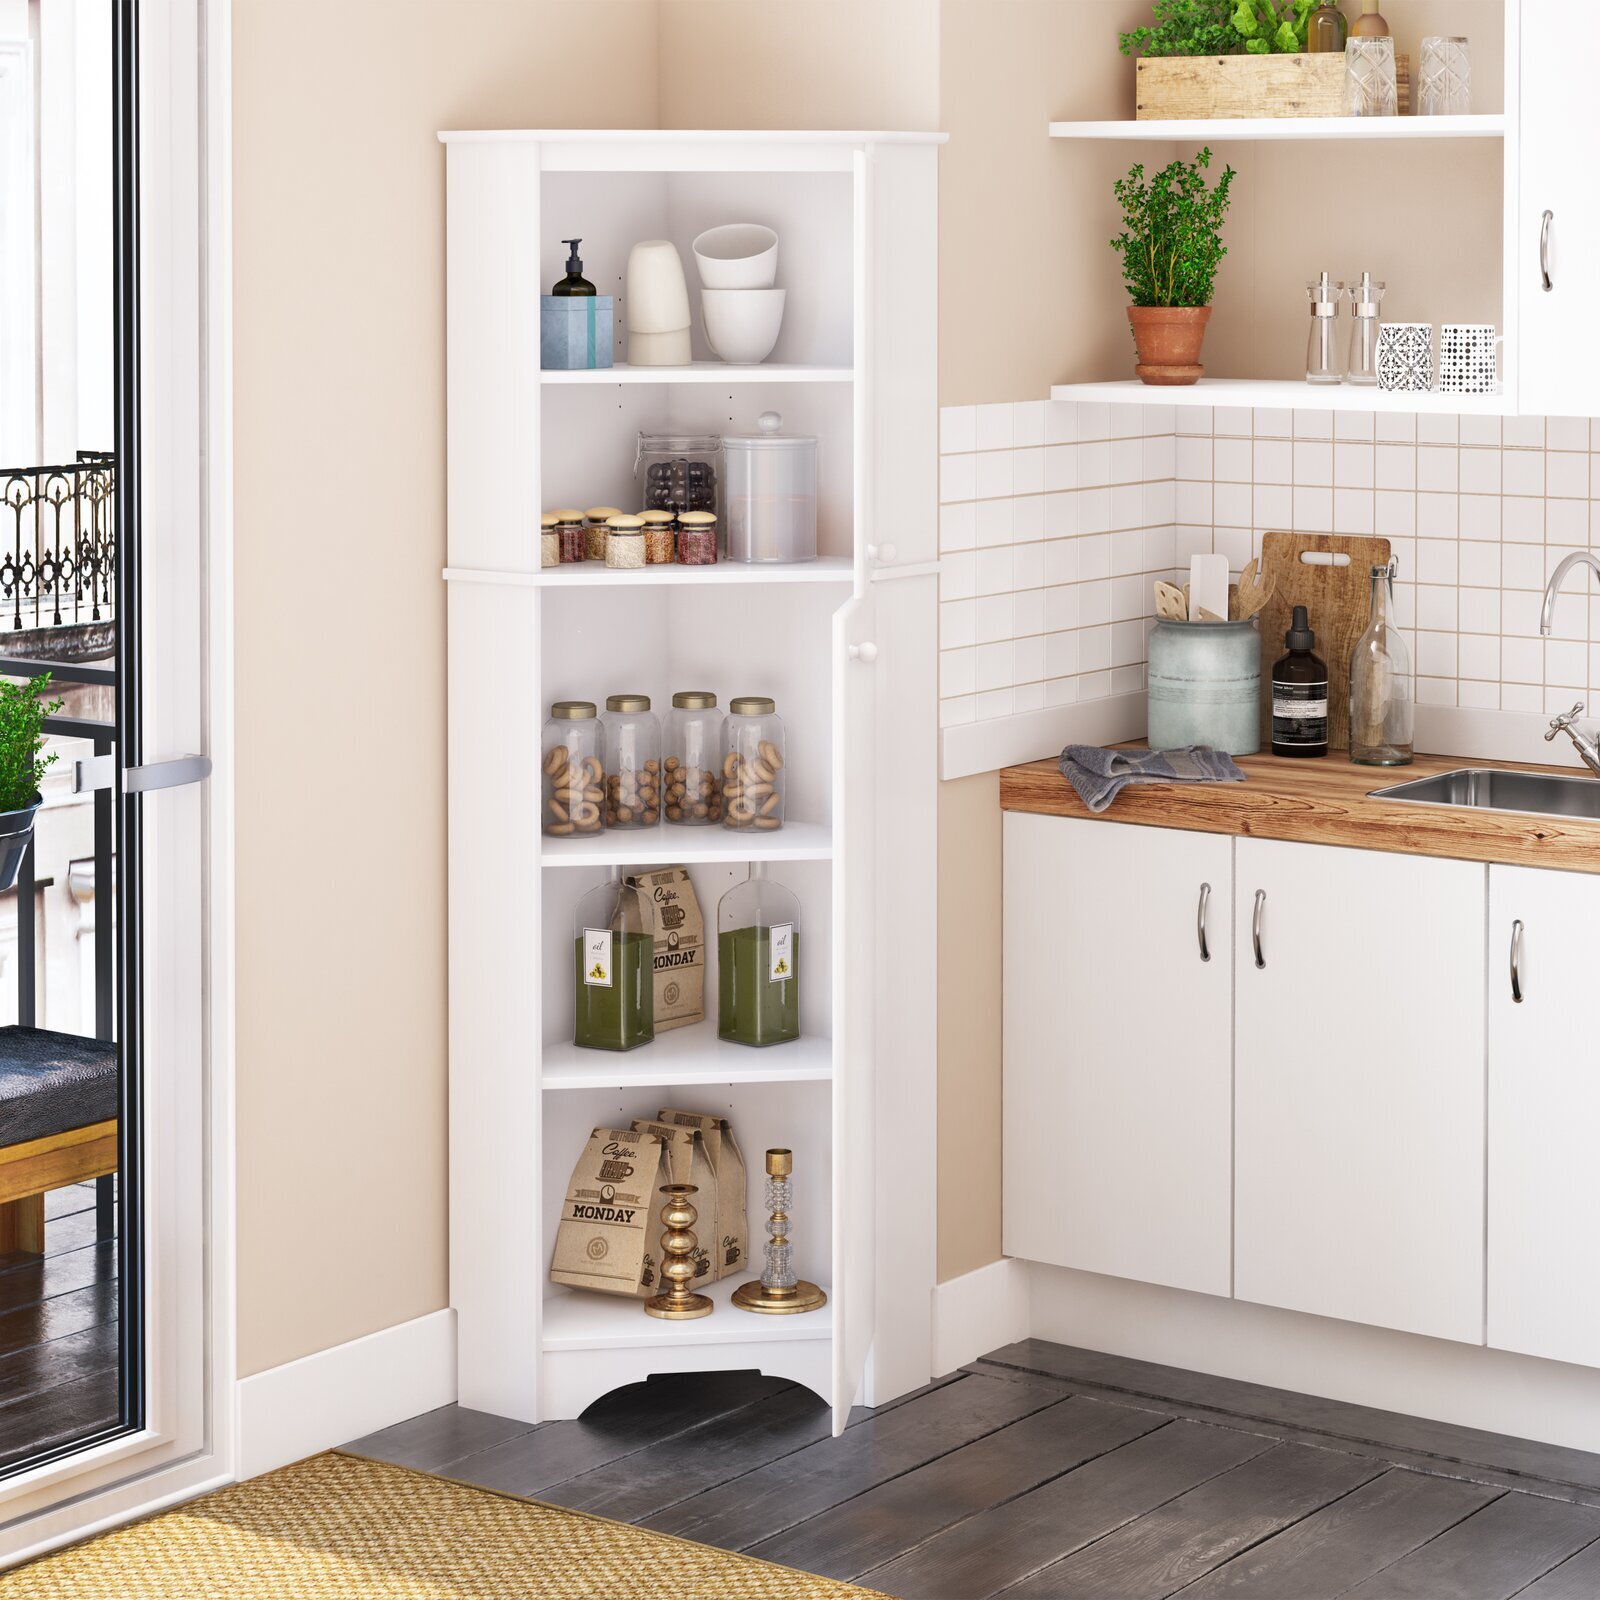 Shallow pantry cabinet as a corner model with closed cupboards